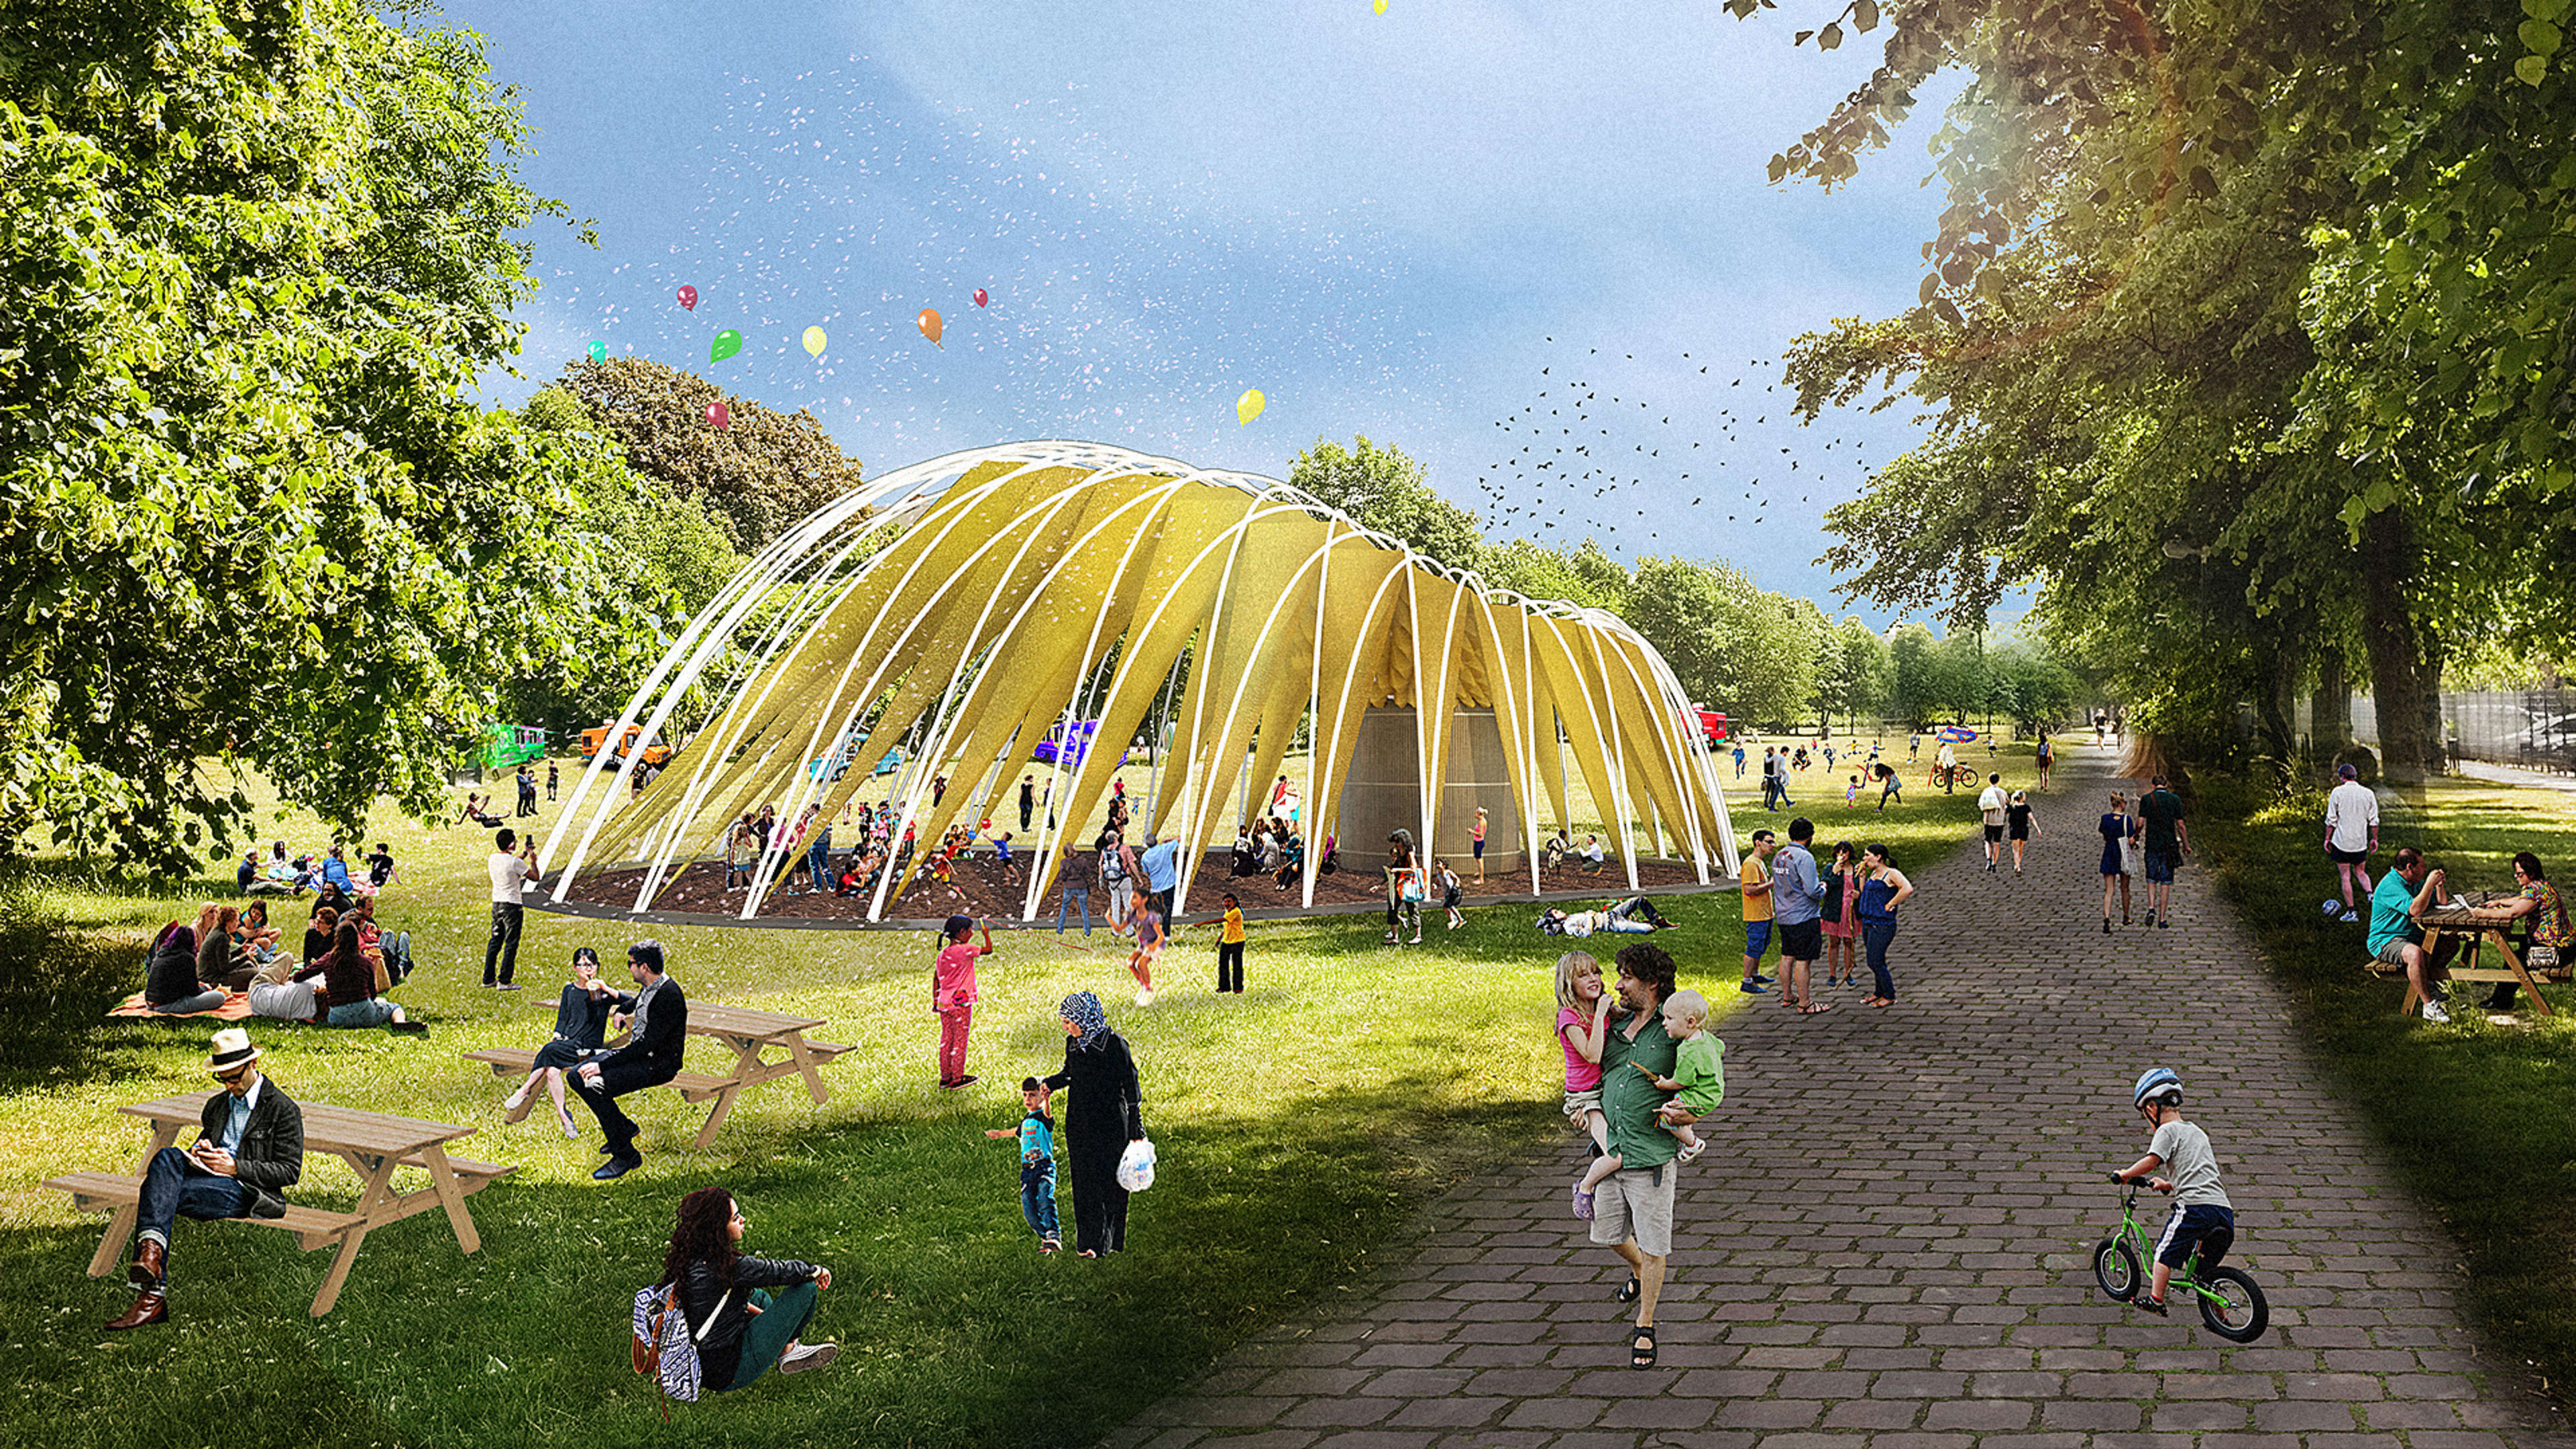 This Pop-Up Pavilion Will Help Refugees Find Local Jobs